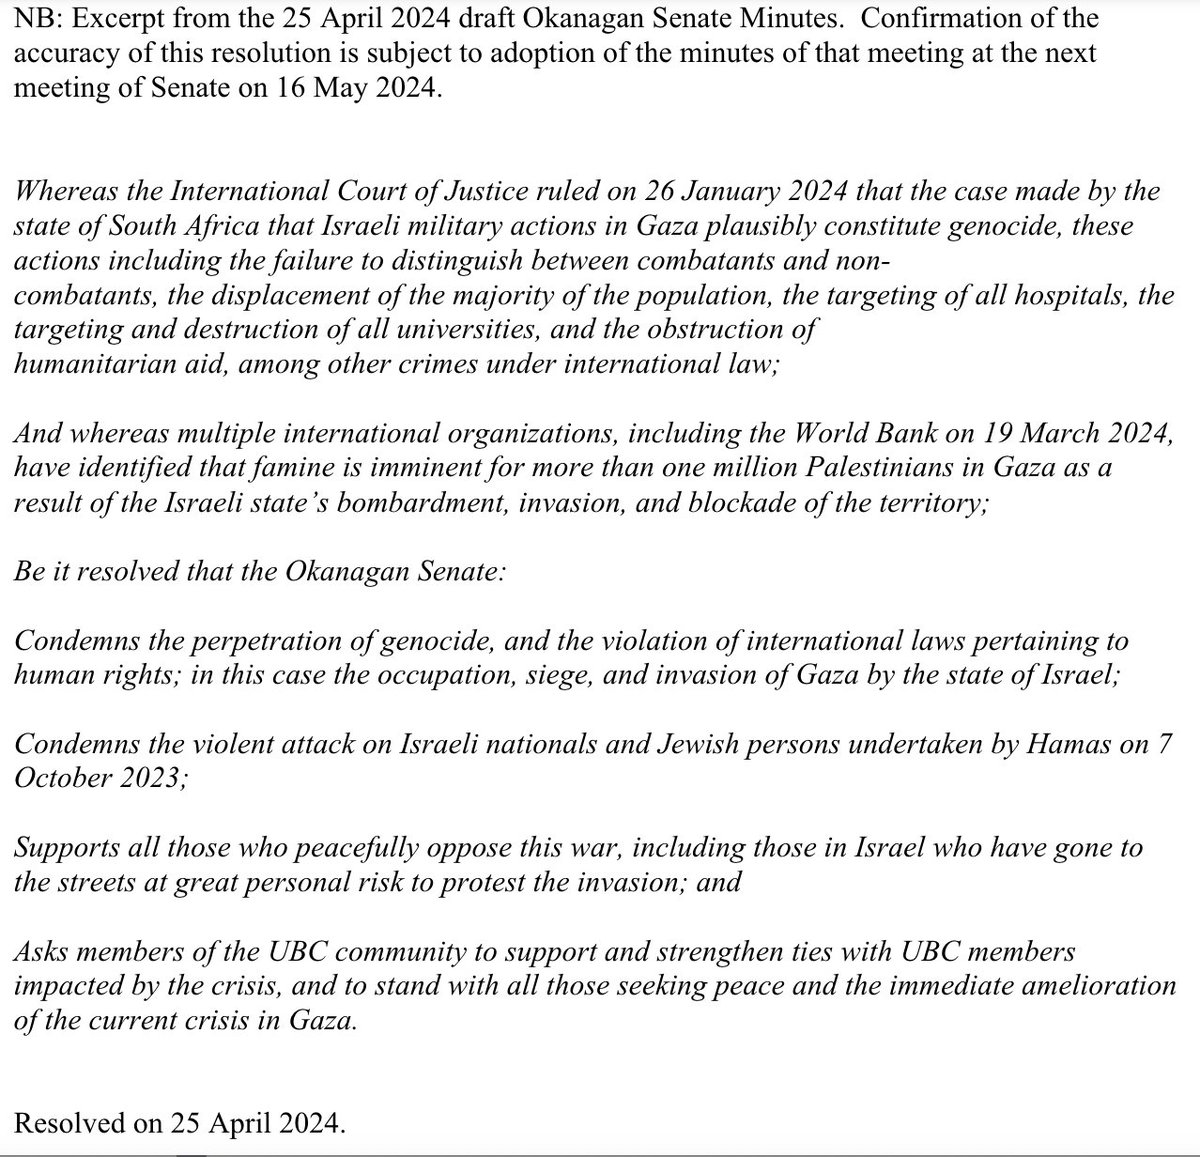 The UBCO Senate removed all clauses of the motion relating to UBCO's relationships with Israel and its universities. The motion condemns Israel for perpetrating genocide, expresses support for peaceful opposition to the invasion, yet is silent on UBCO's complicity.